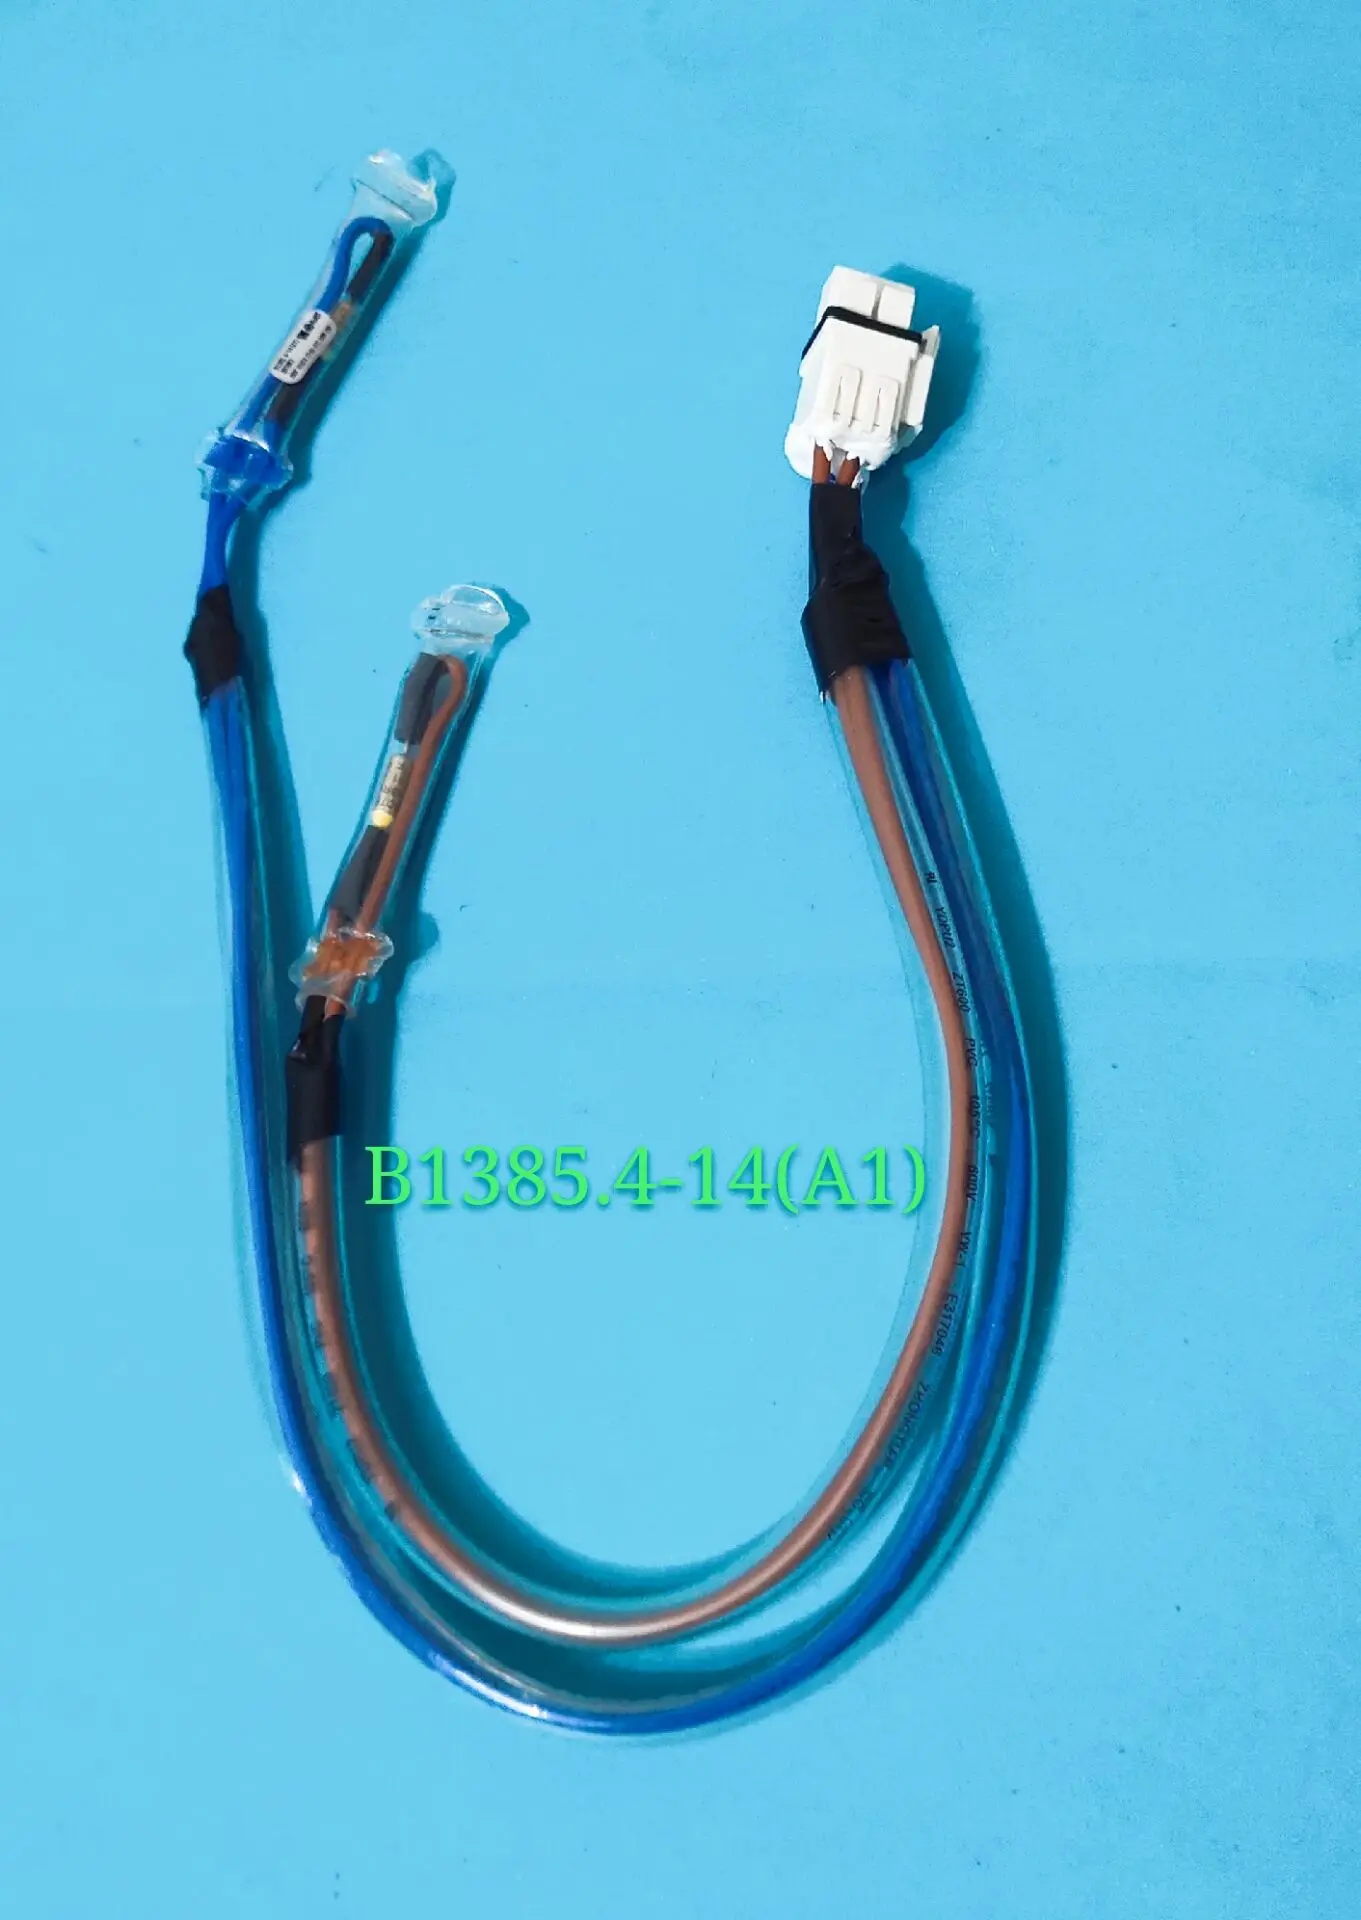 

Meiling / Athena / Refrigerator Defrosting Fuse Temperature Fuse B1385.4-14 (A1) B1385.4-14